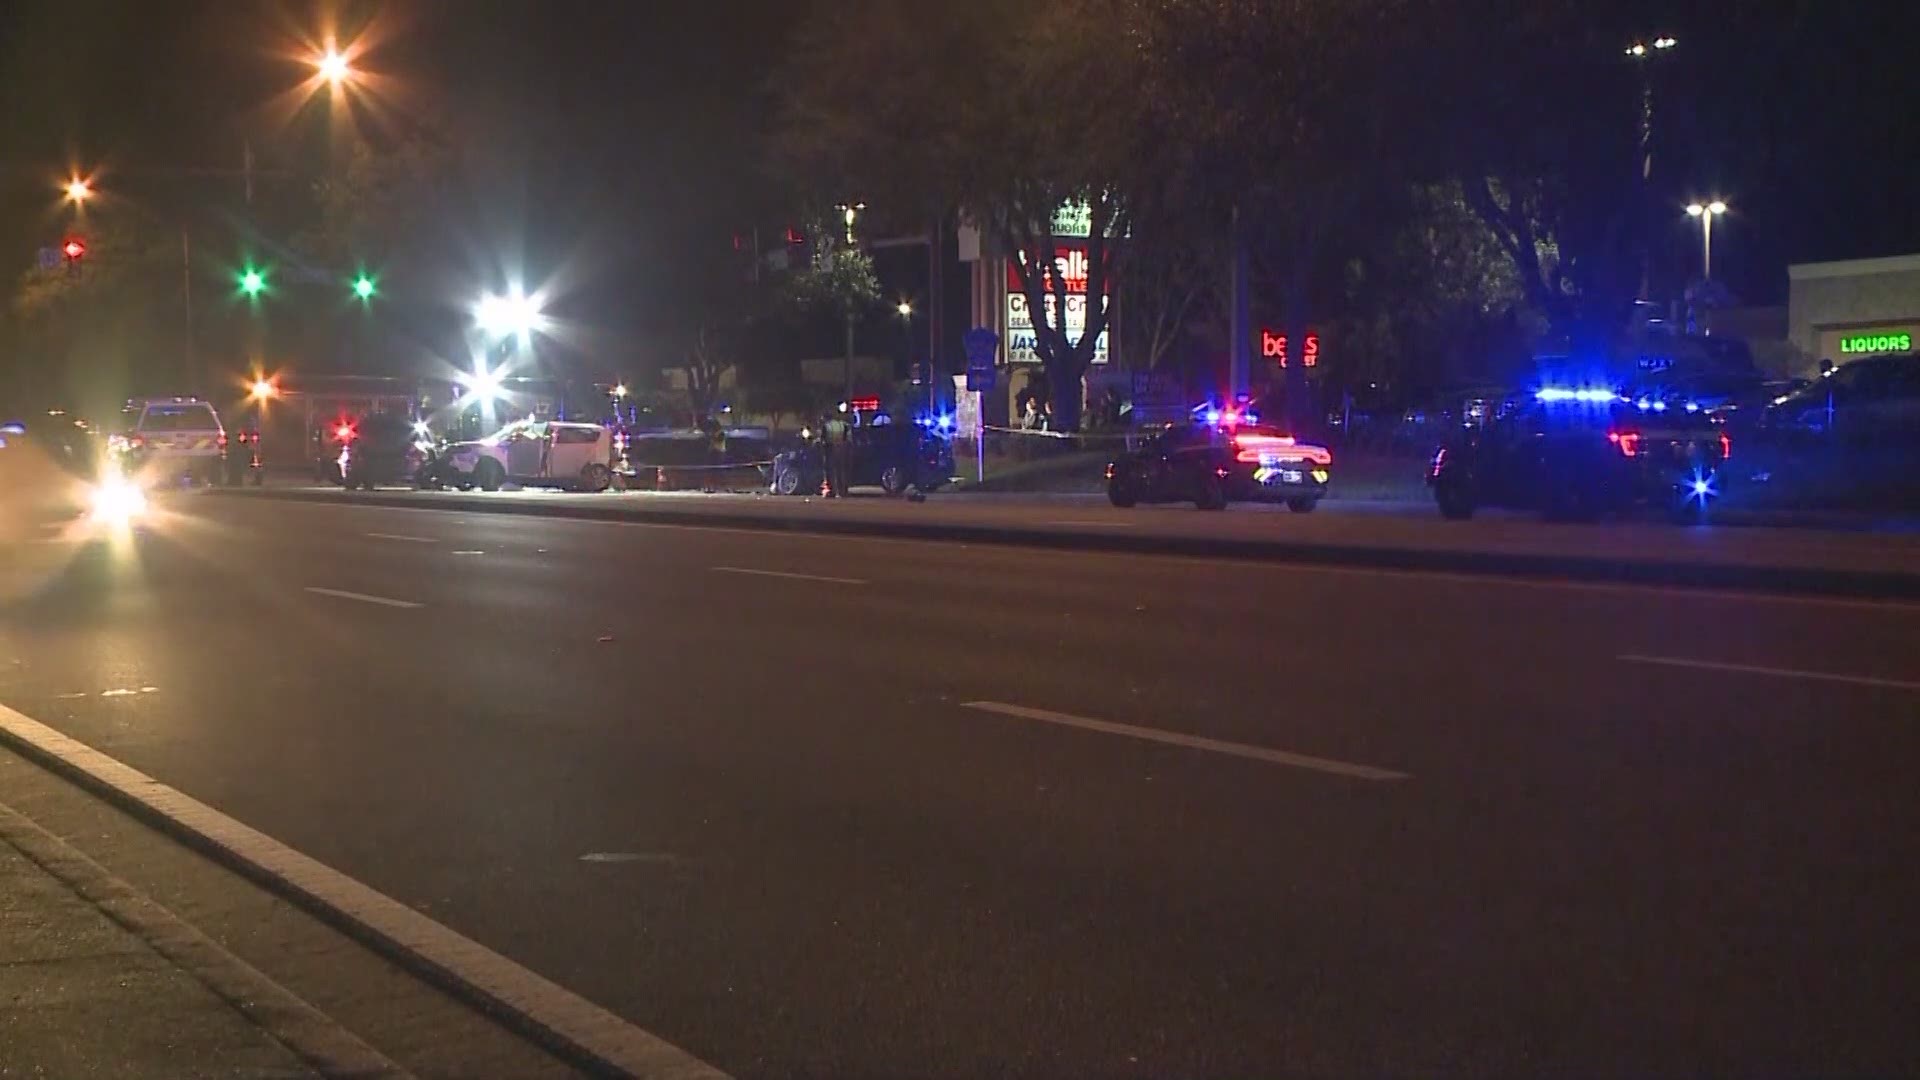 An infant was rushed to a hospital in life-threatening condition Sunday evening after a multi-car crash shut down traffic in Orange Park, according to Florida Highway Patrol.